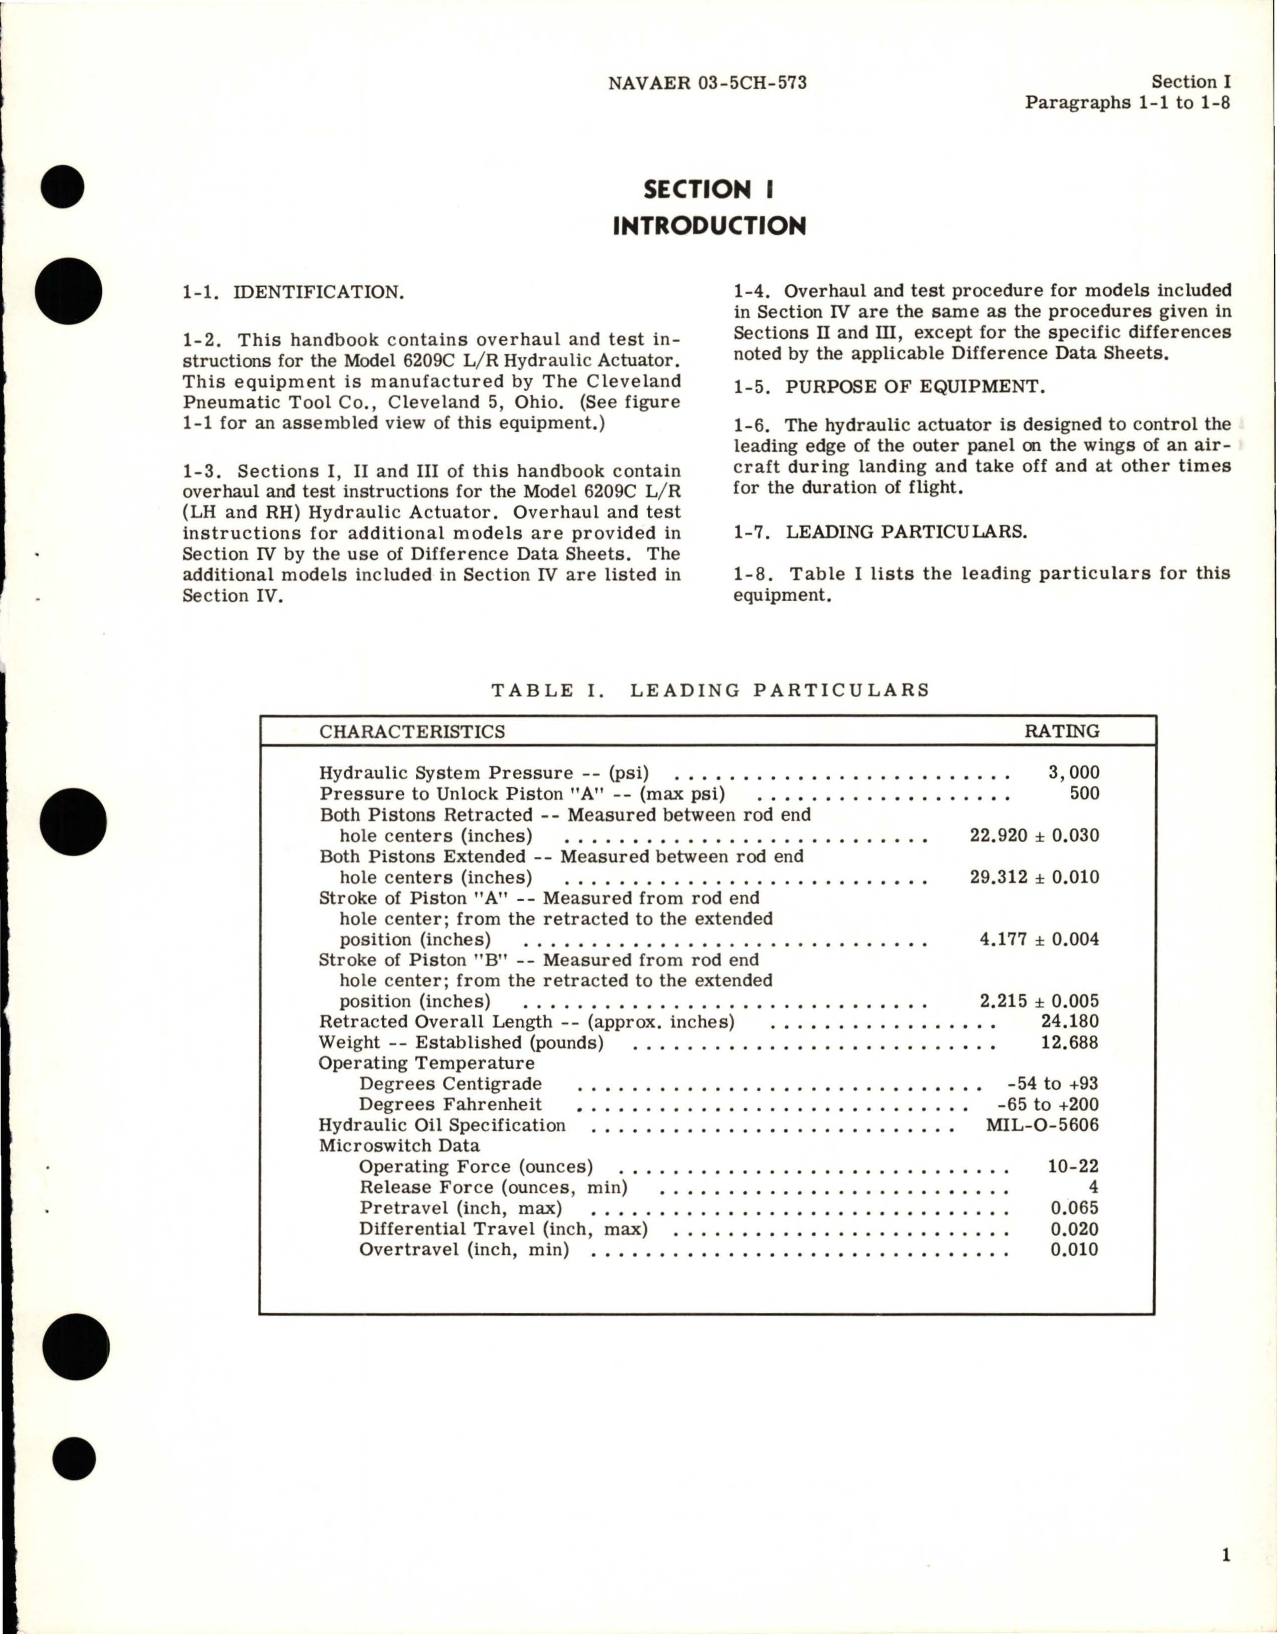 Sample page 5 from AirCorps Library document: Overhaul Instructions for Hydraulic Actuator - Models 6209C, 6209D, and 6209E 